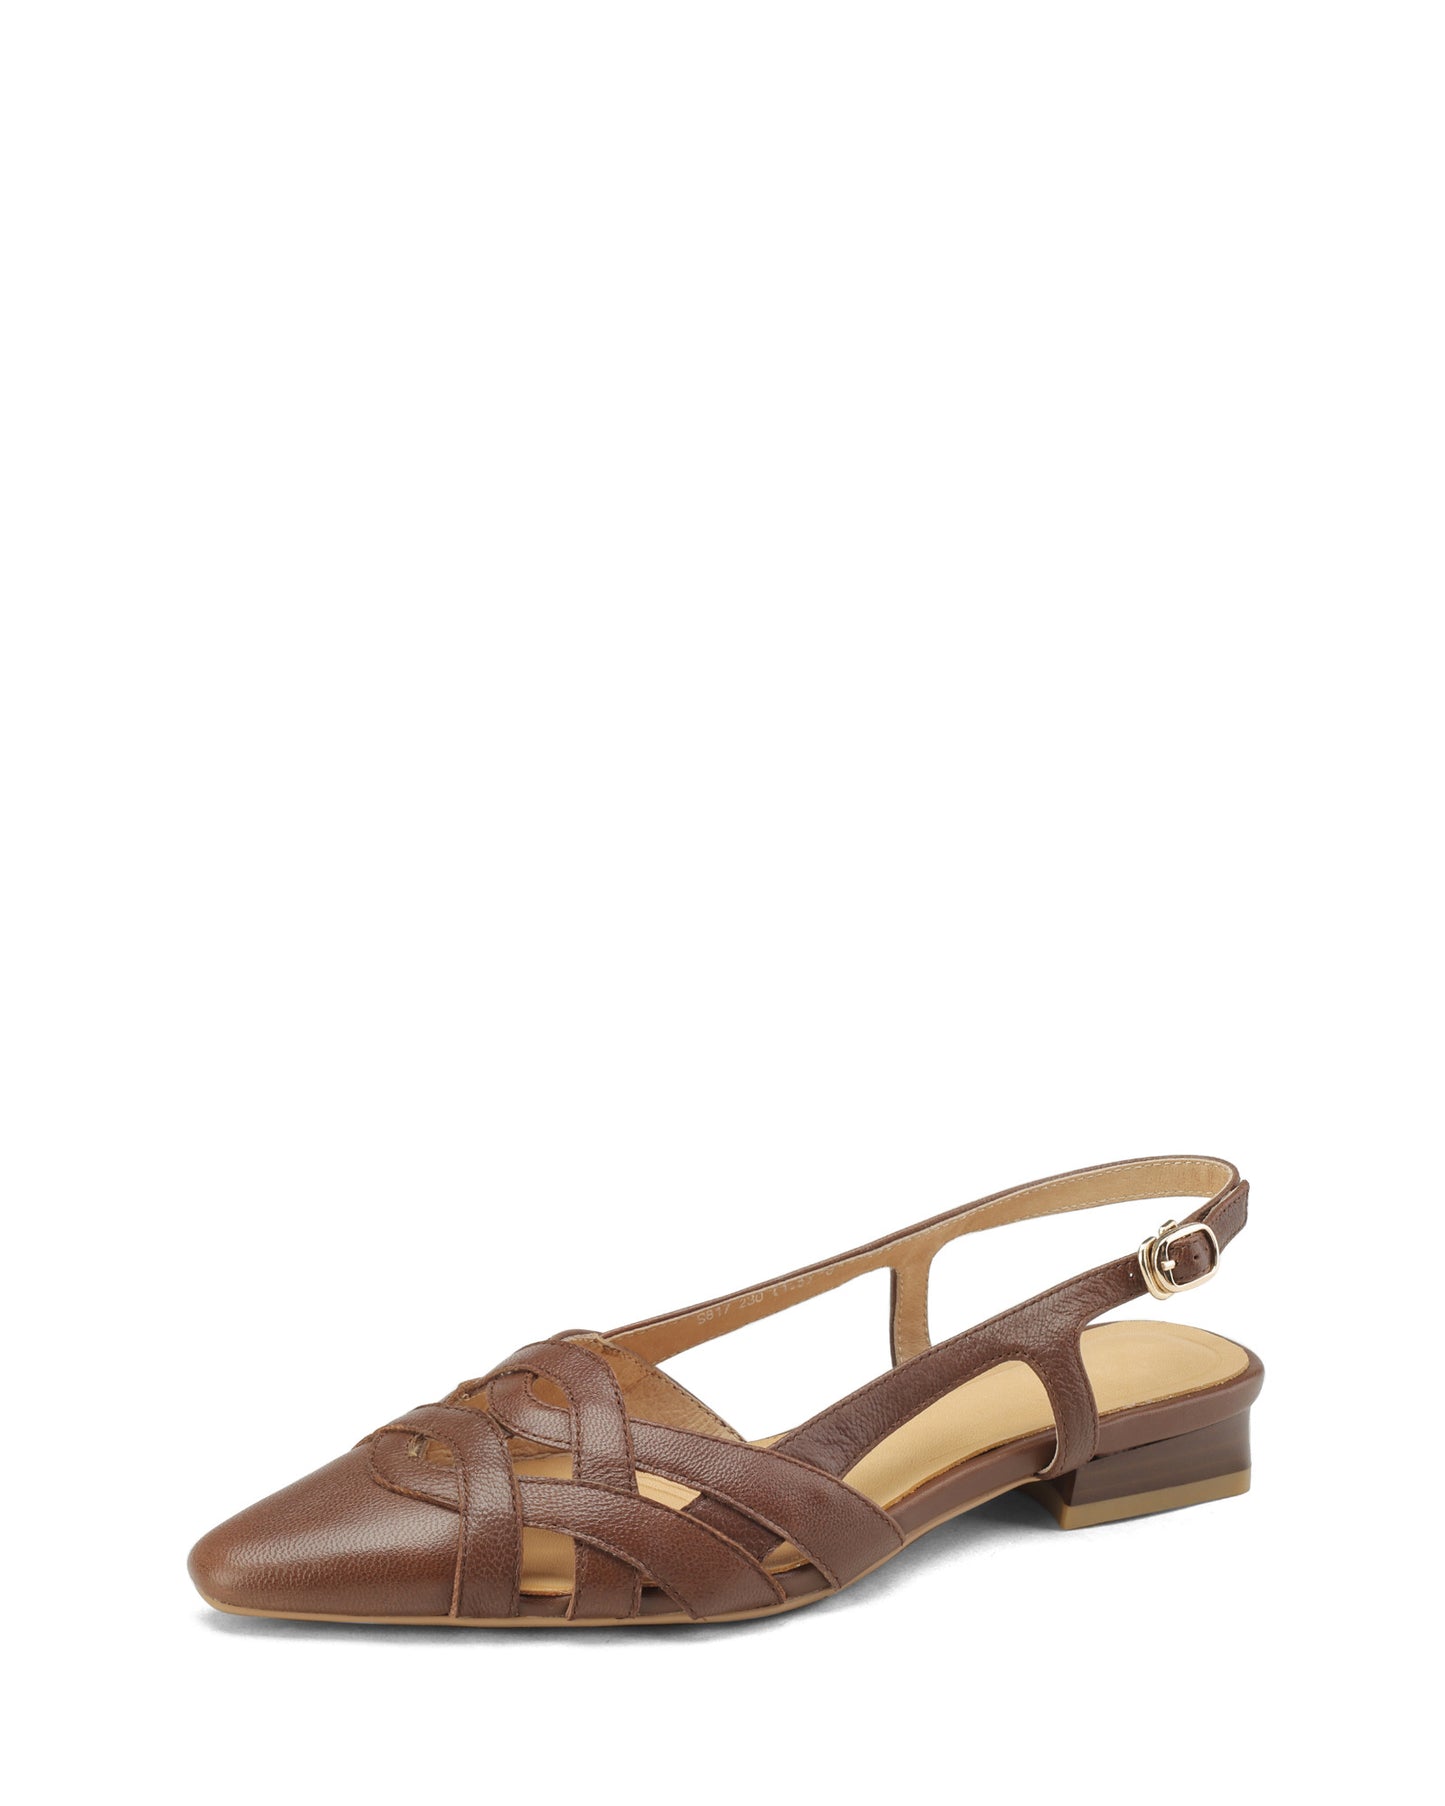 Moda-brown-leather-flat-sandals